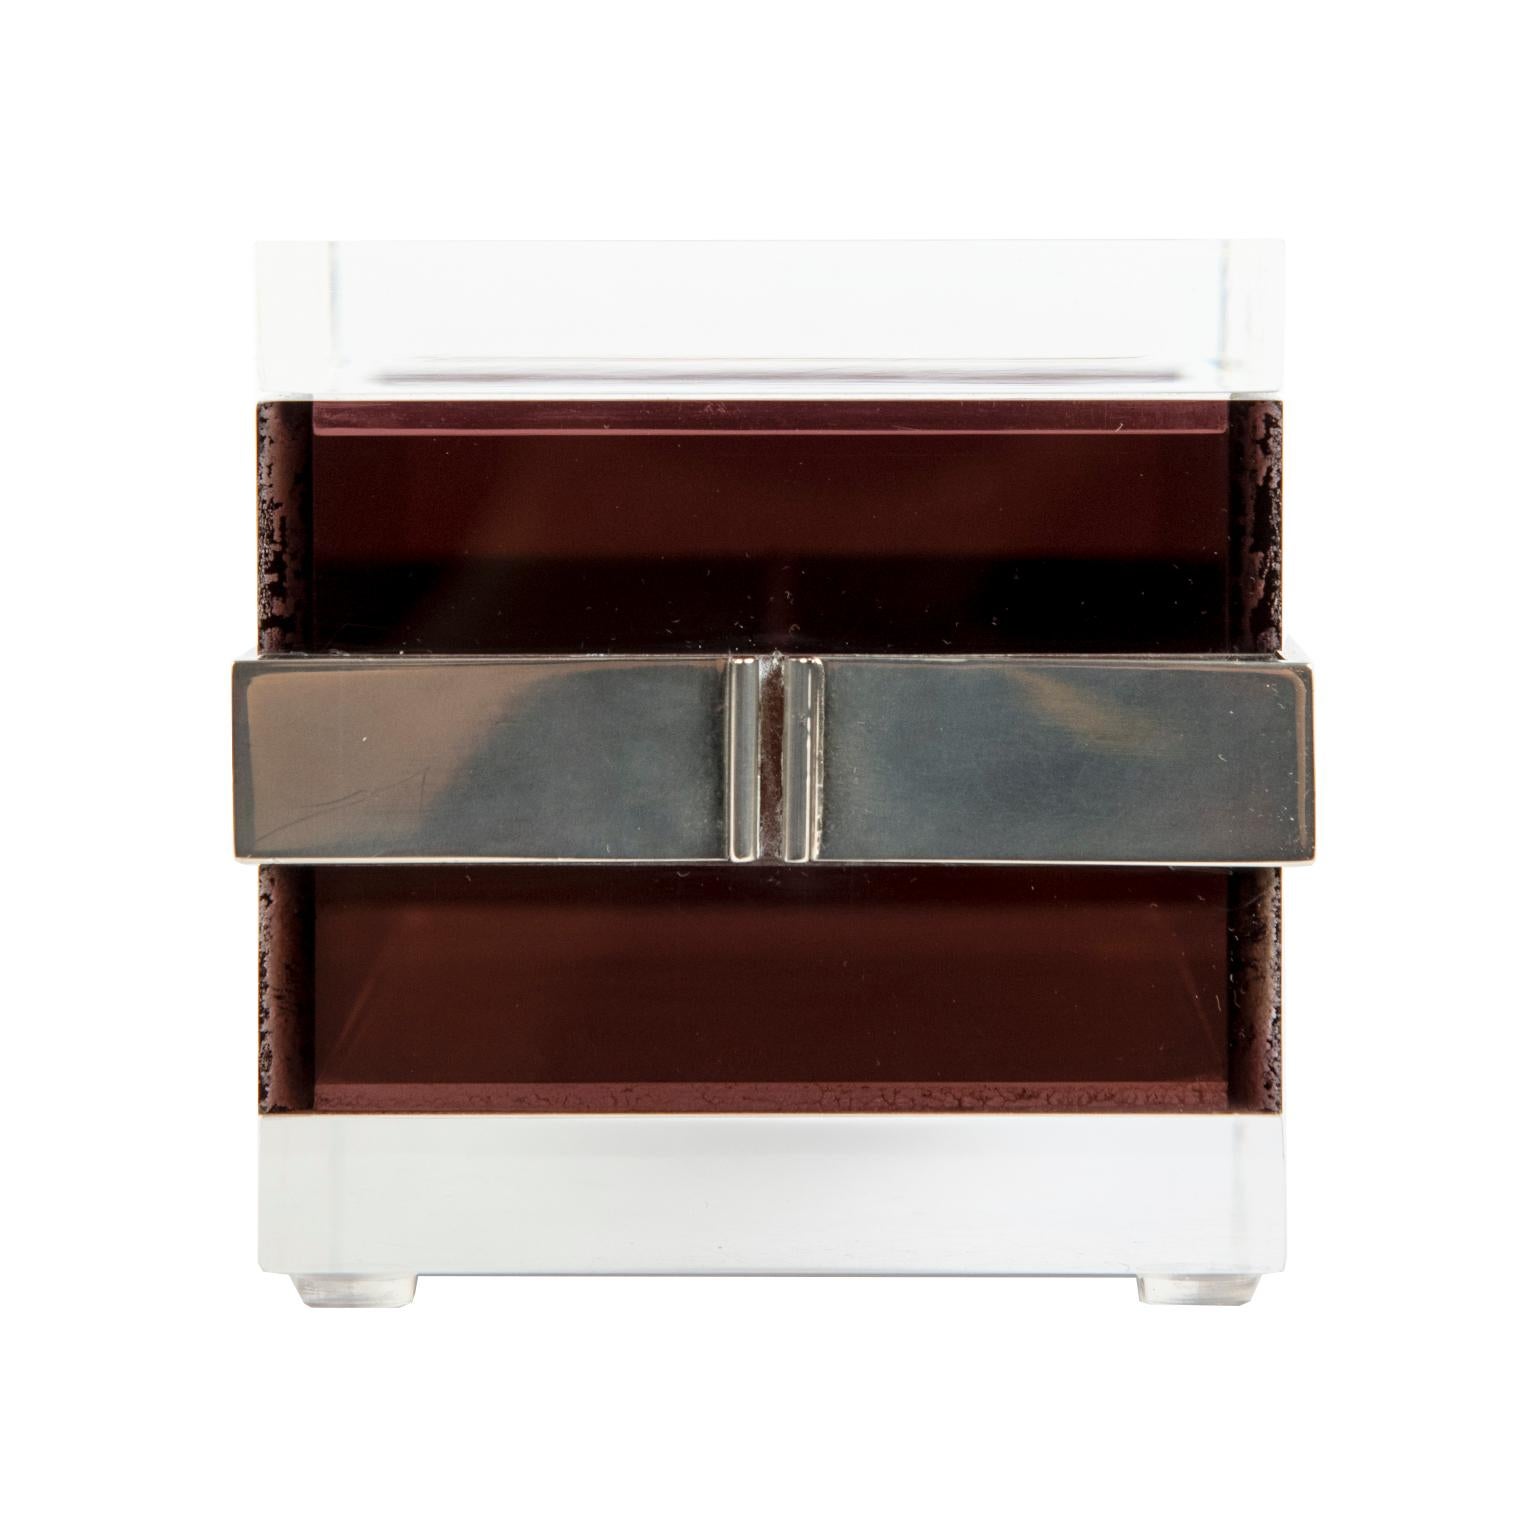 A clean and sophisticated acrylic box with clear top and bottom with layers of “chocolate” brown acrylic with a plated steel middle band.
Very good vintage condition!